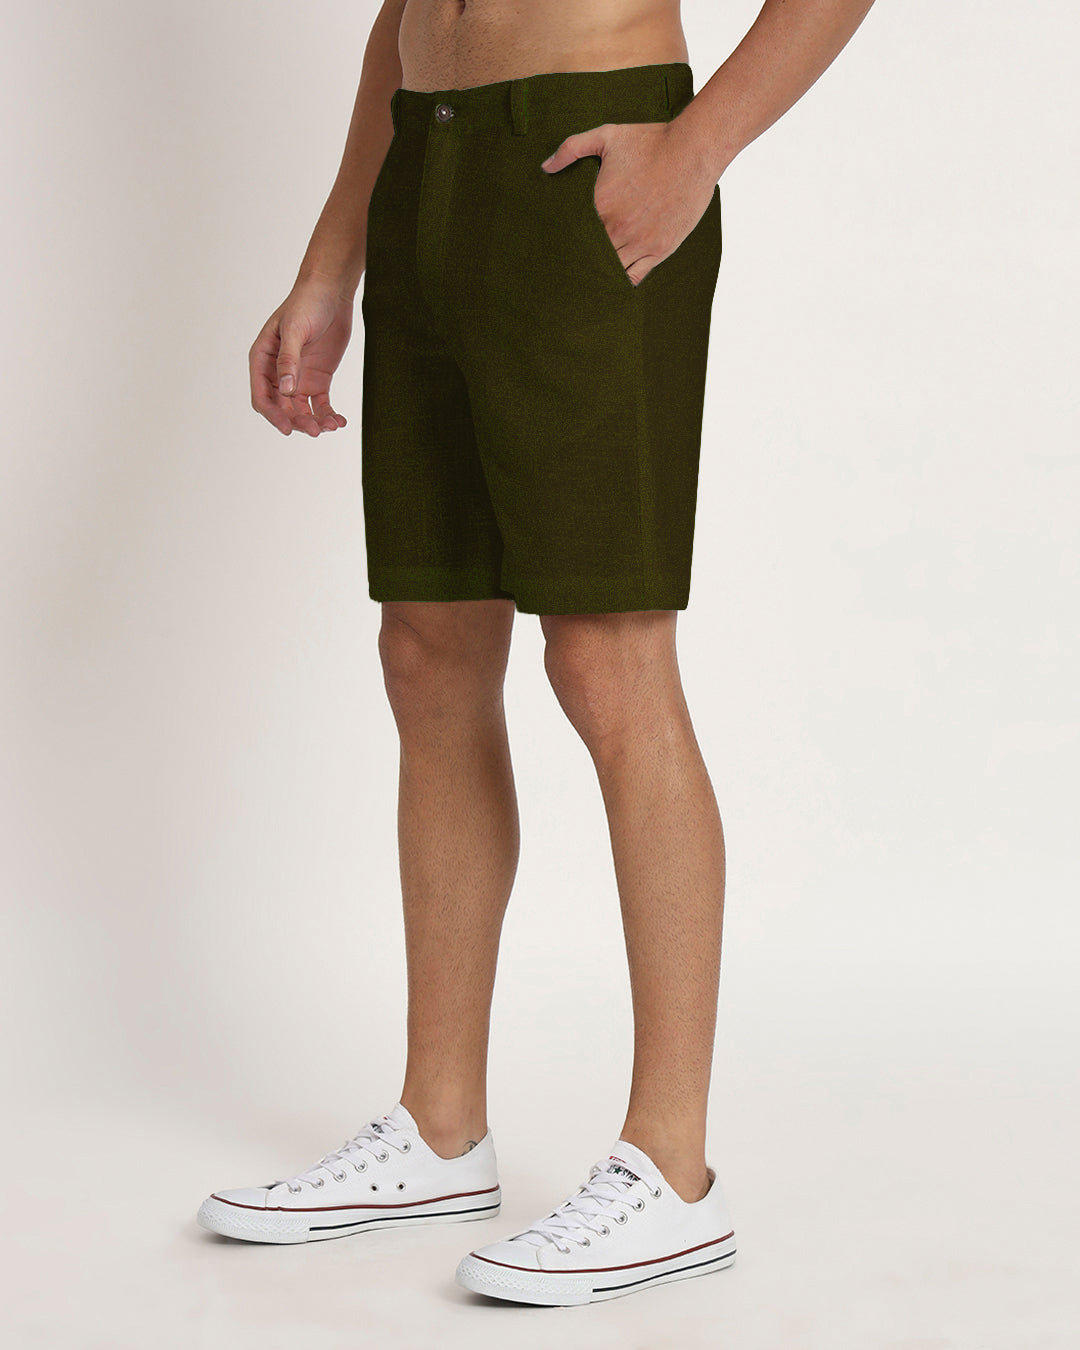 Ready For Anything Olive Green Men's Shorts